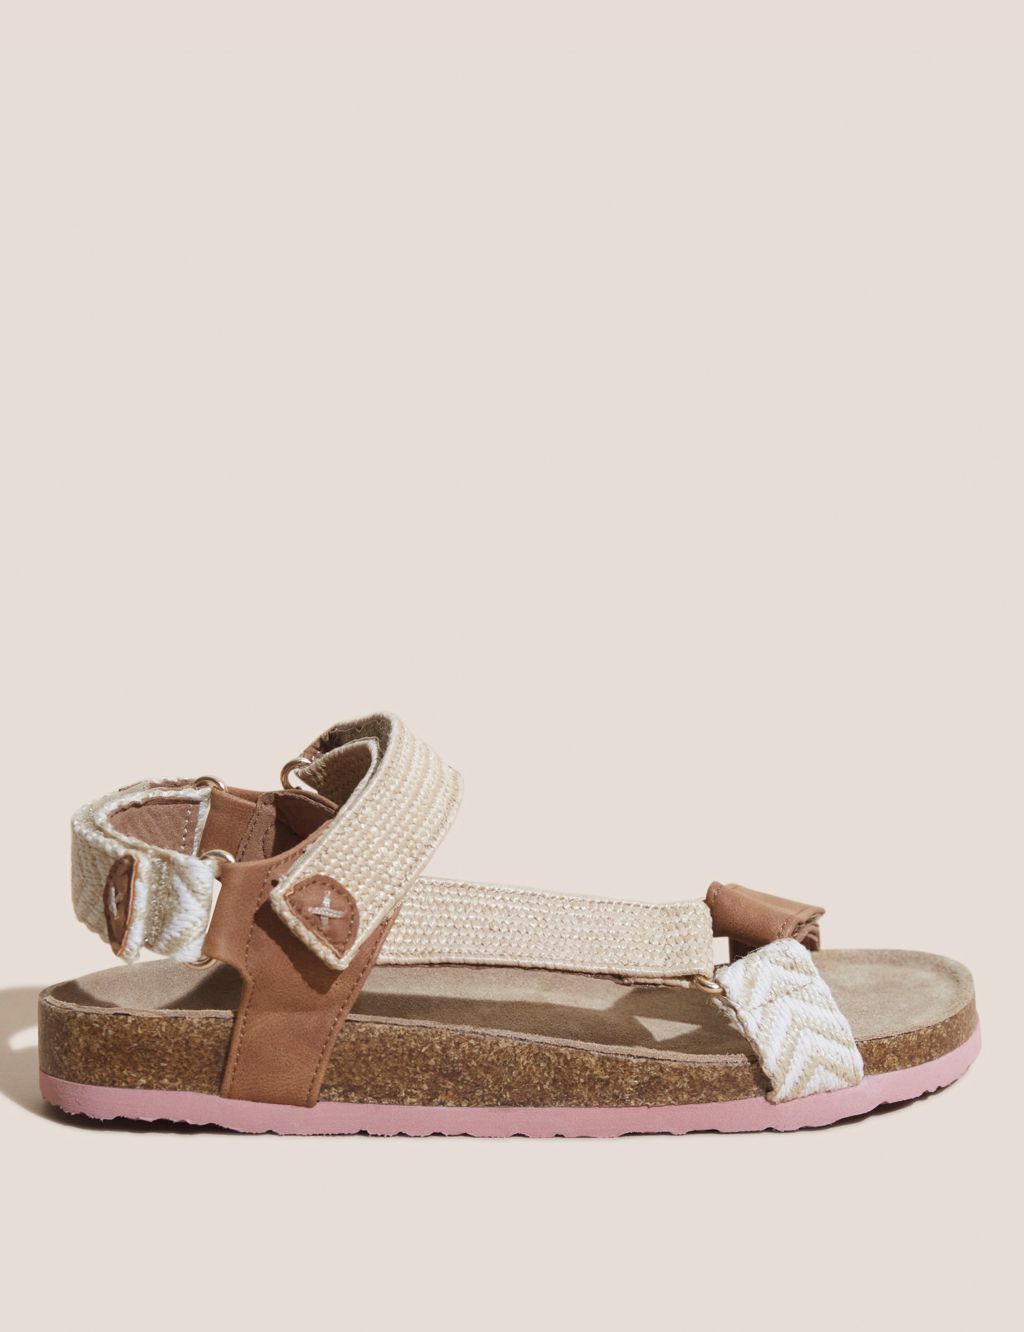 Woven Ankle Strap Footbed Sandals image 1